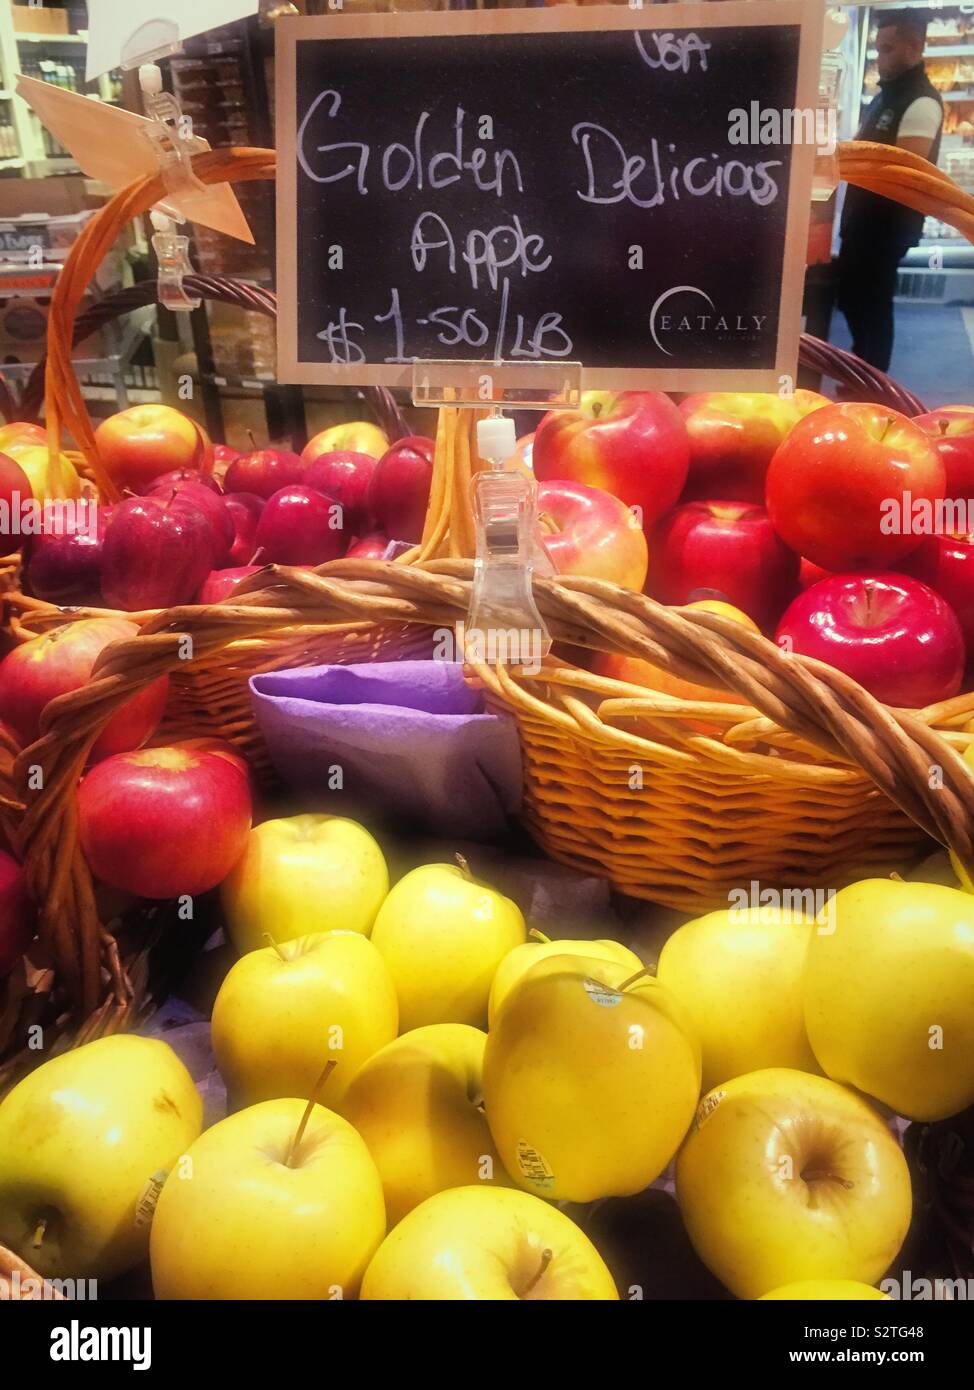 Wicker basket display of golden delicious apples at Eataly, NYC, USA Stock Photo